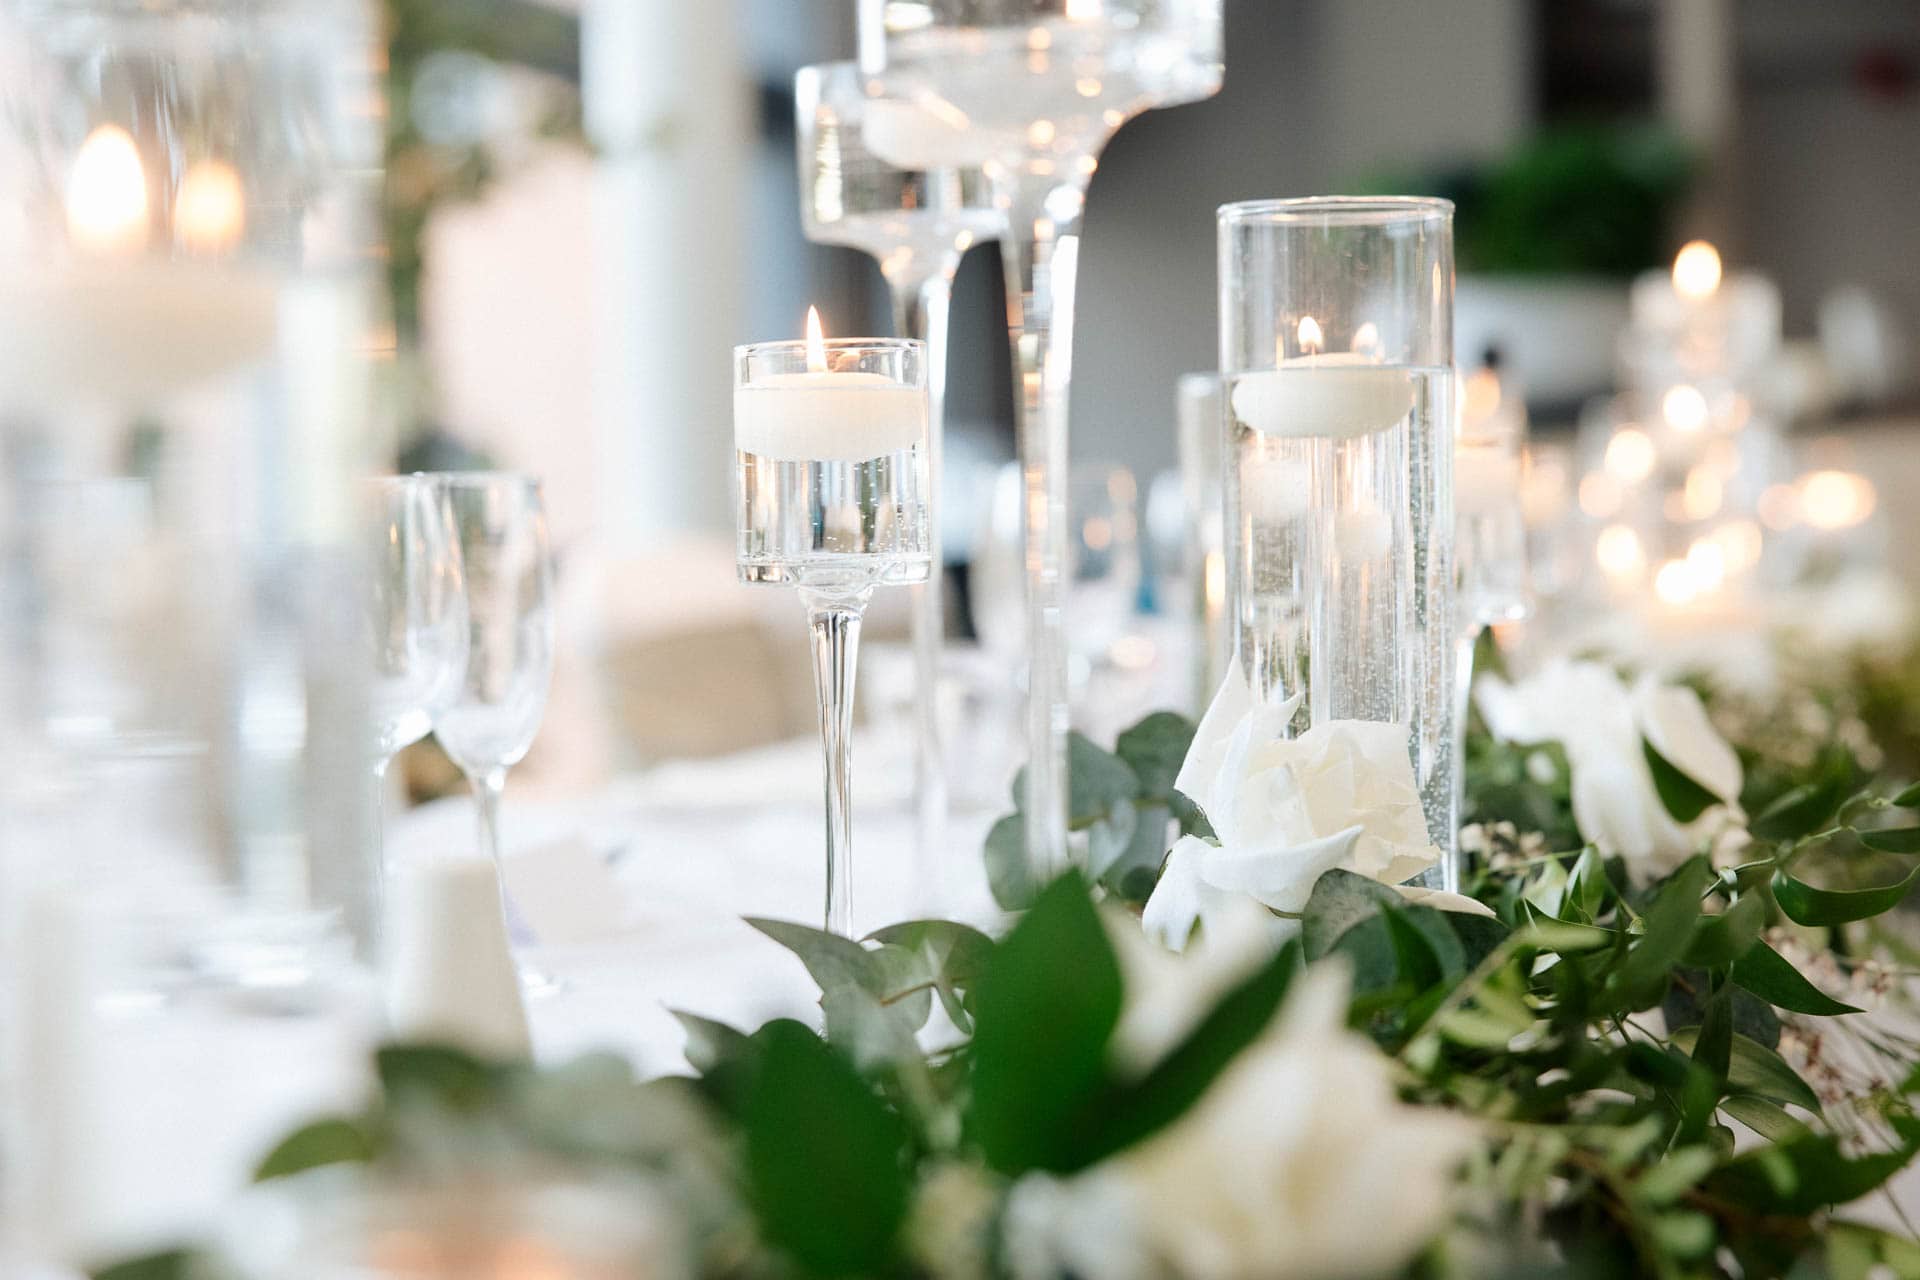 wedding breakfast and speeches at the castlefield rooms manchester wedding venue